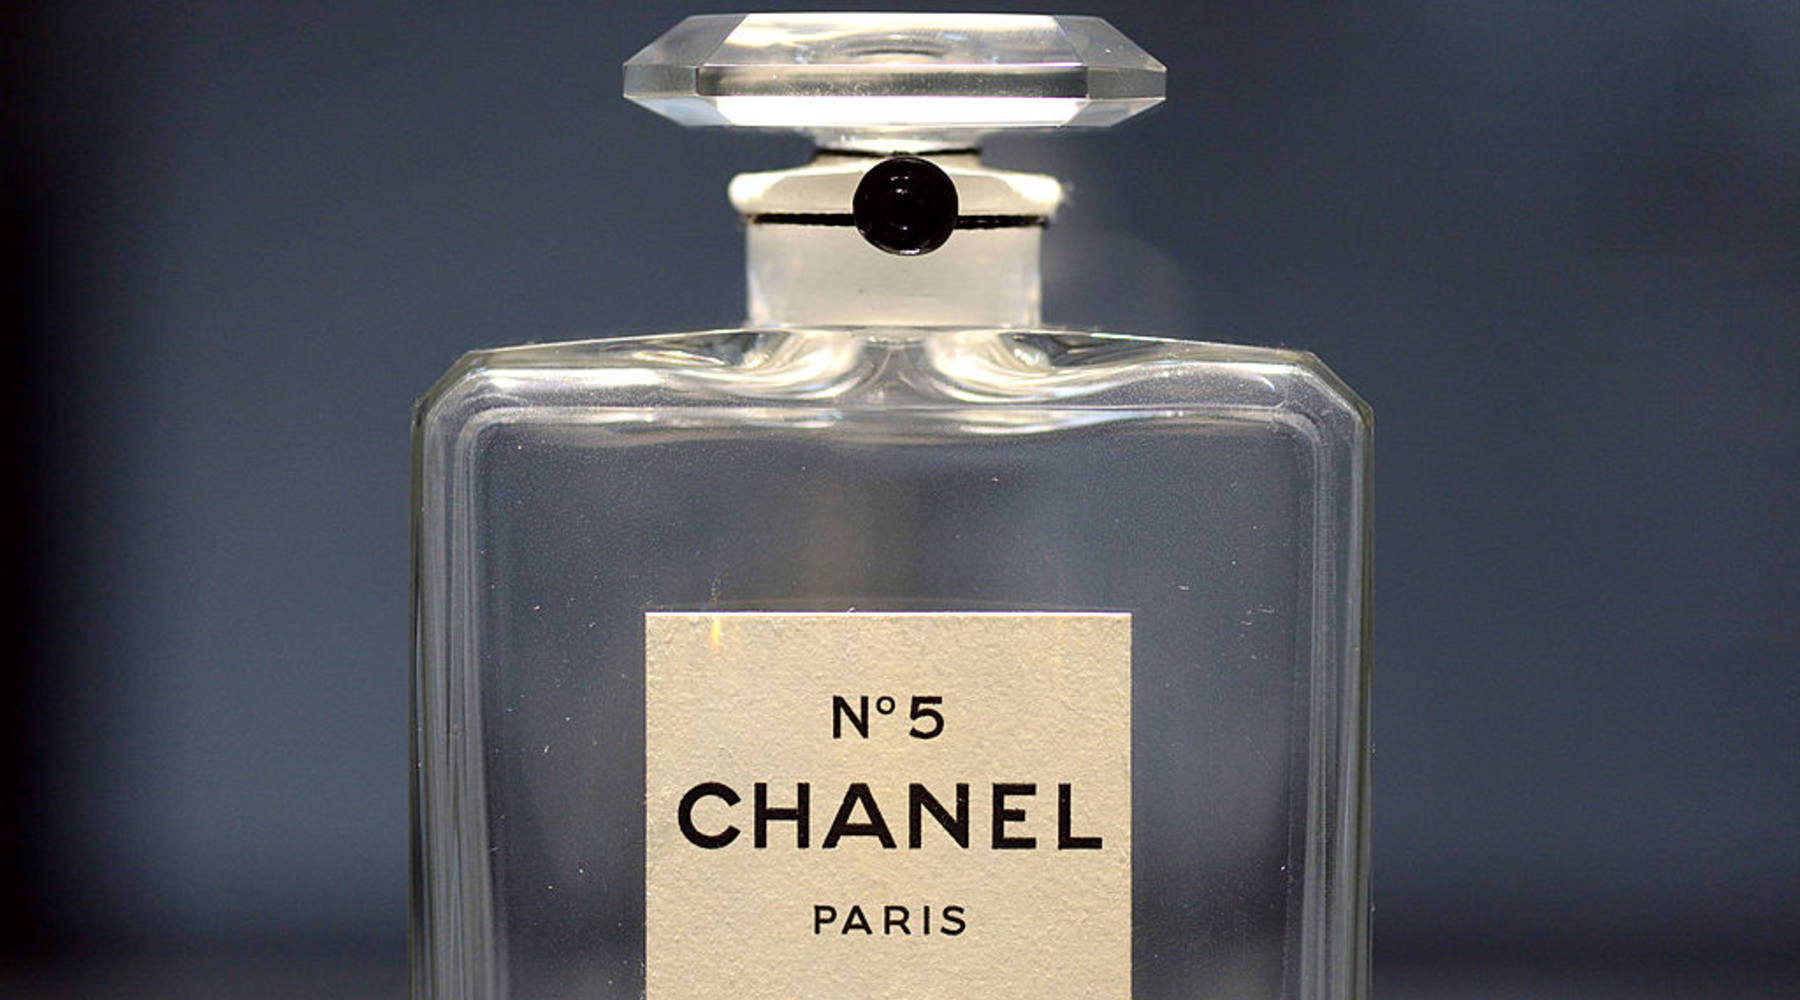 UK perfume shops hope new Chanel fragrance can mask foul sales  Retail  industry  The Guardian